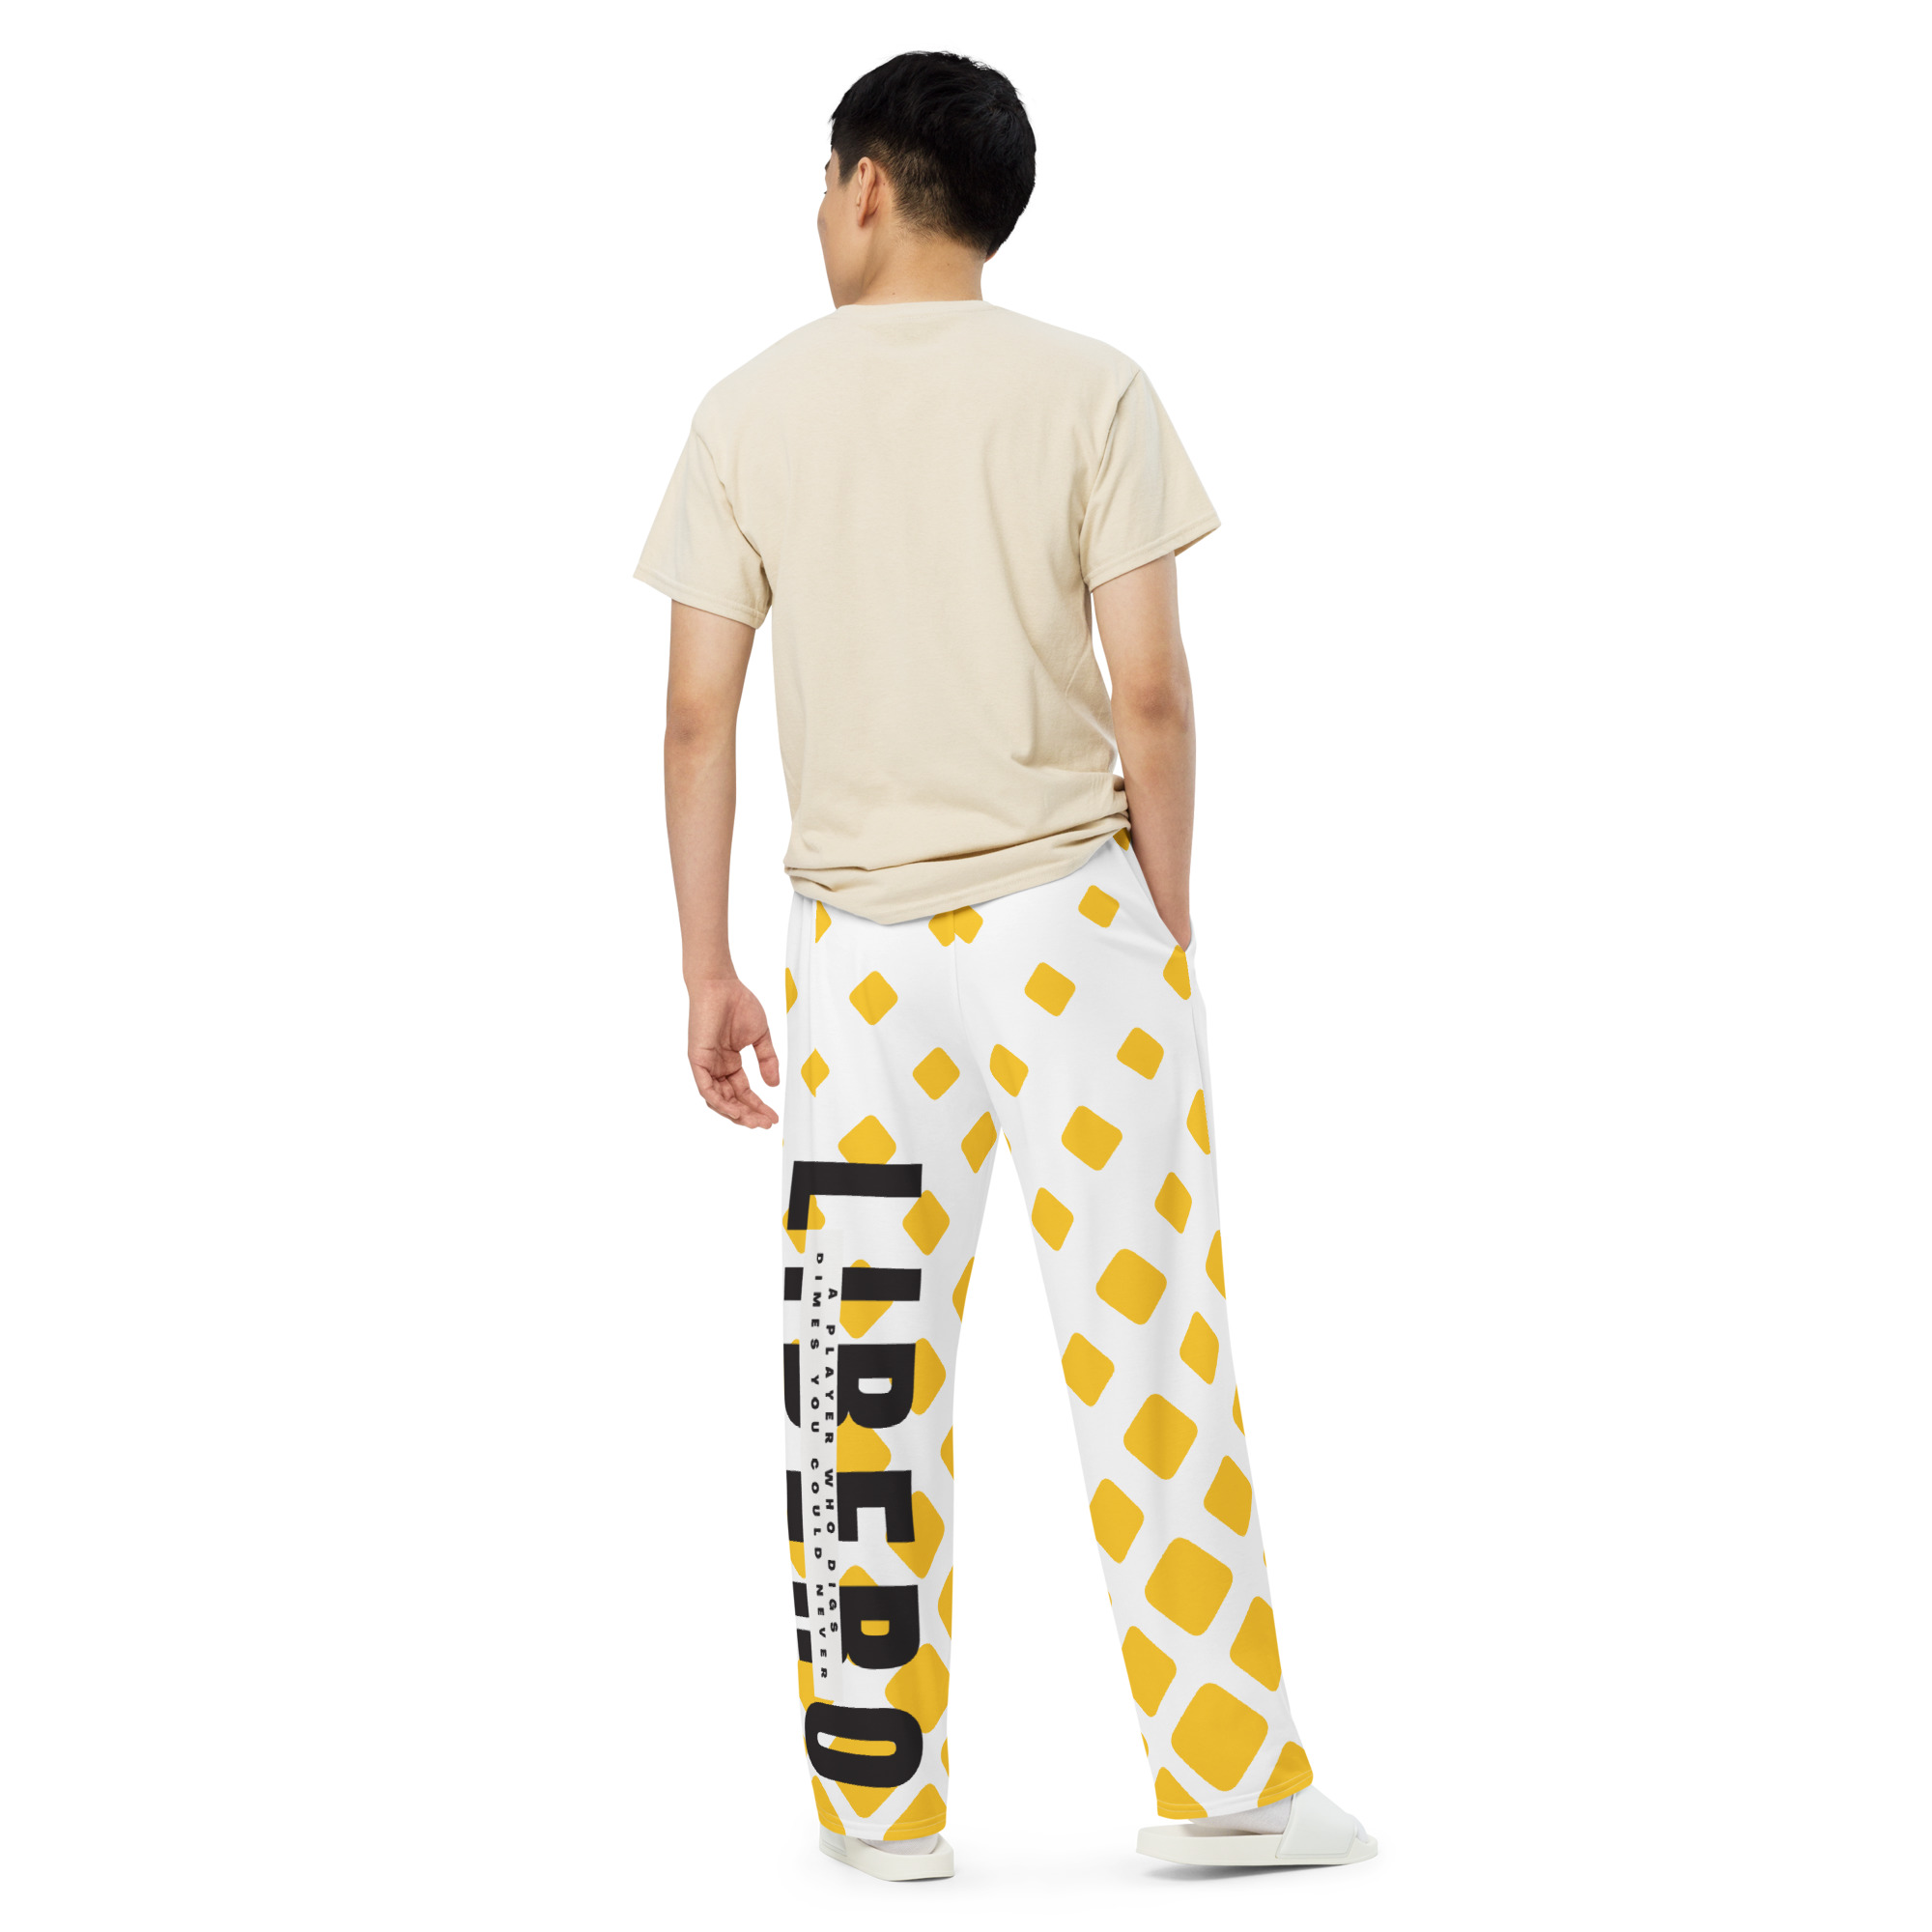 Hi my name is Coach April and I create inspiring volleyball designs on cute motivational volleyball clothes that empower volleyball players like these yellow pajama pj pants that hype up liberos.